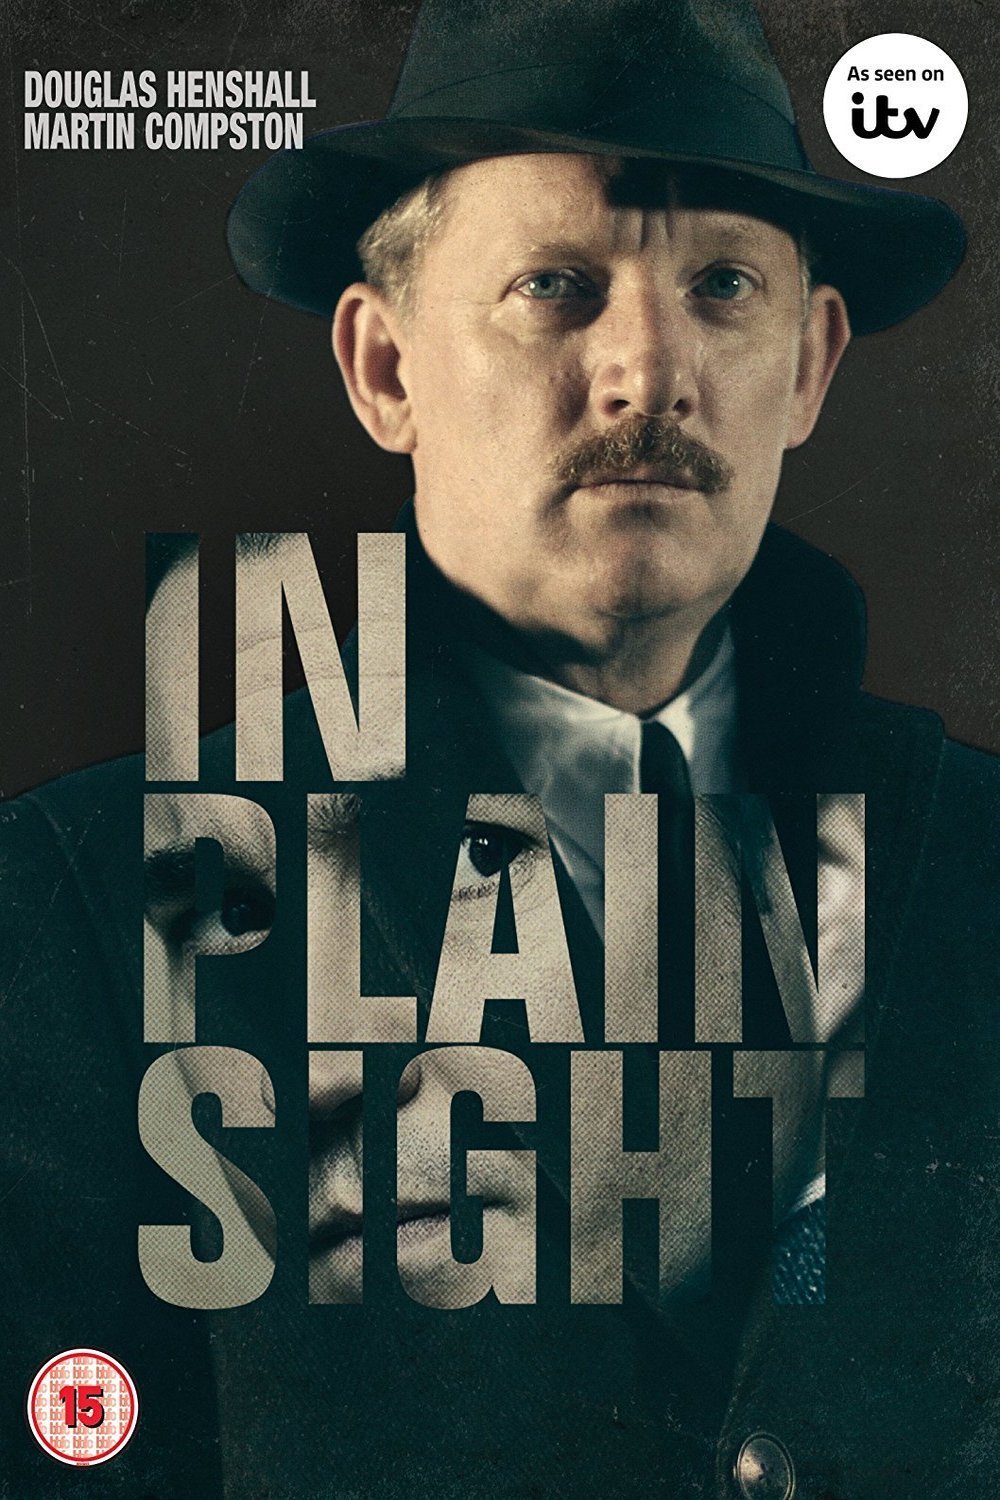 Poster of the movie In Plain Sight